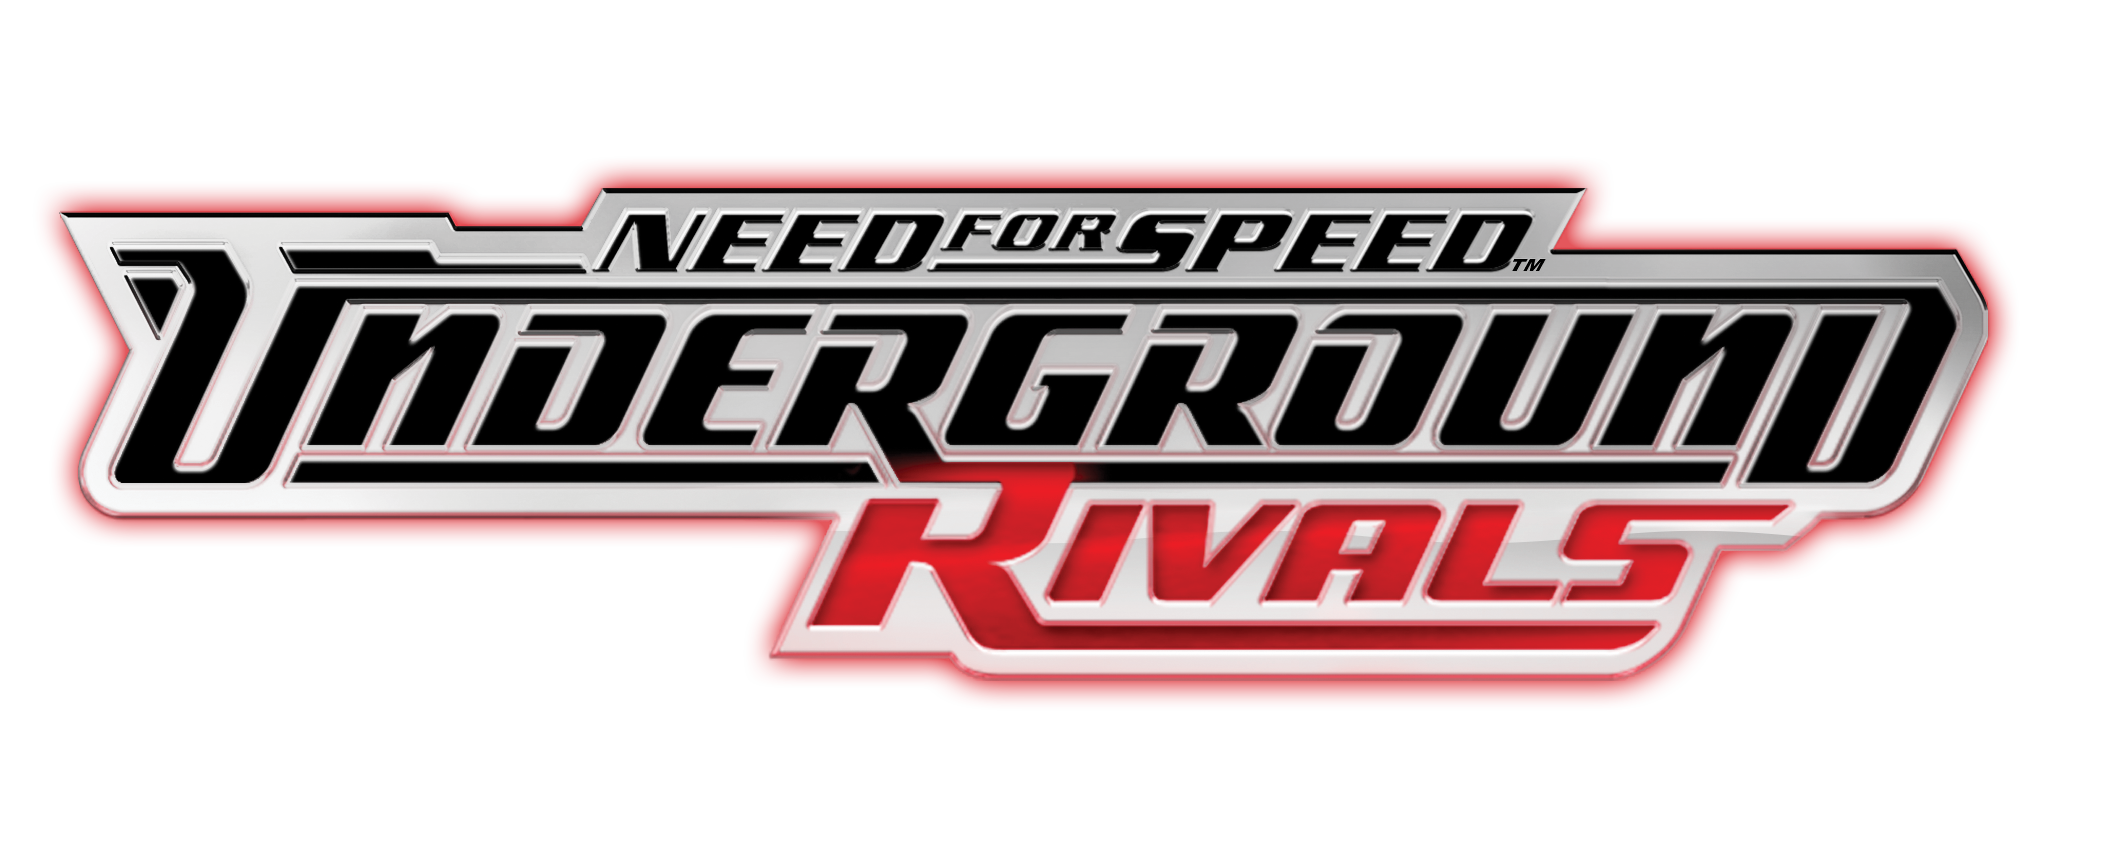 Where is Need for Speed Underground Rivals set in?